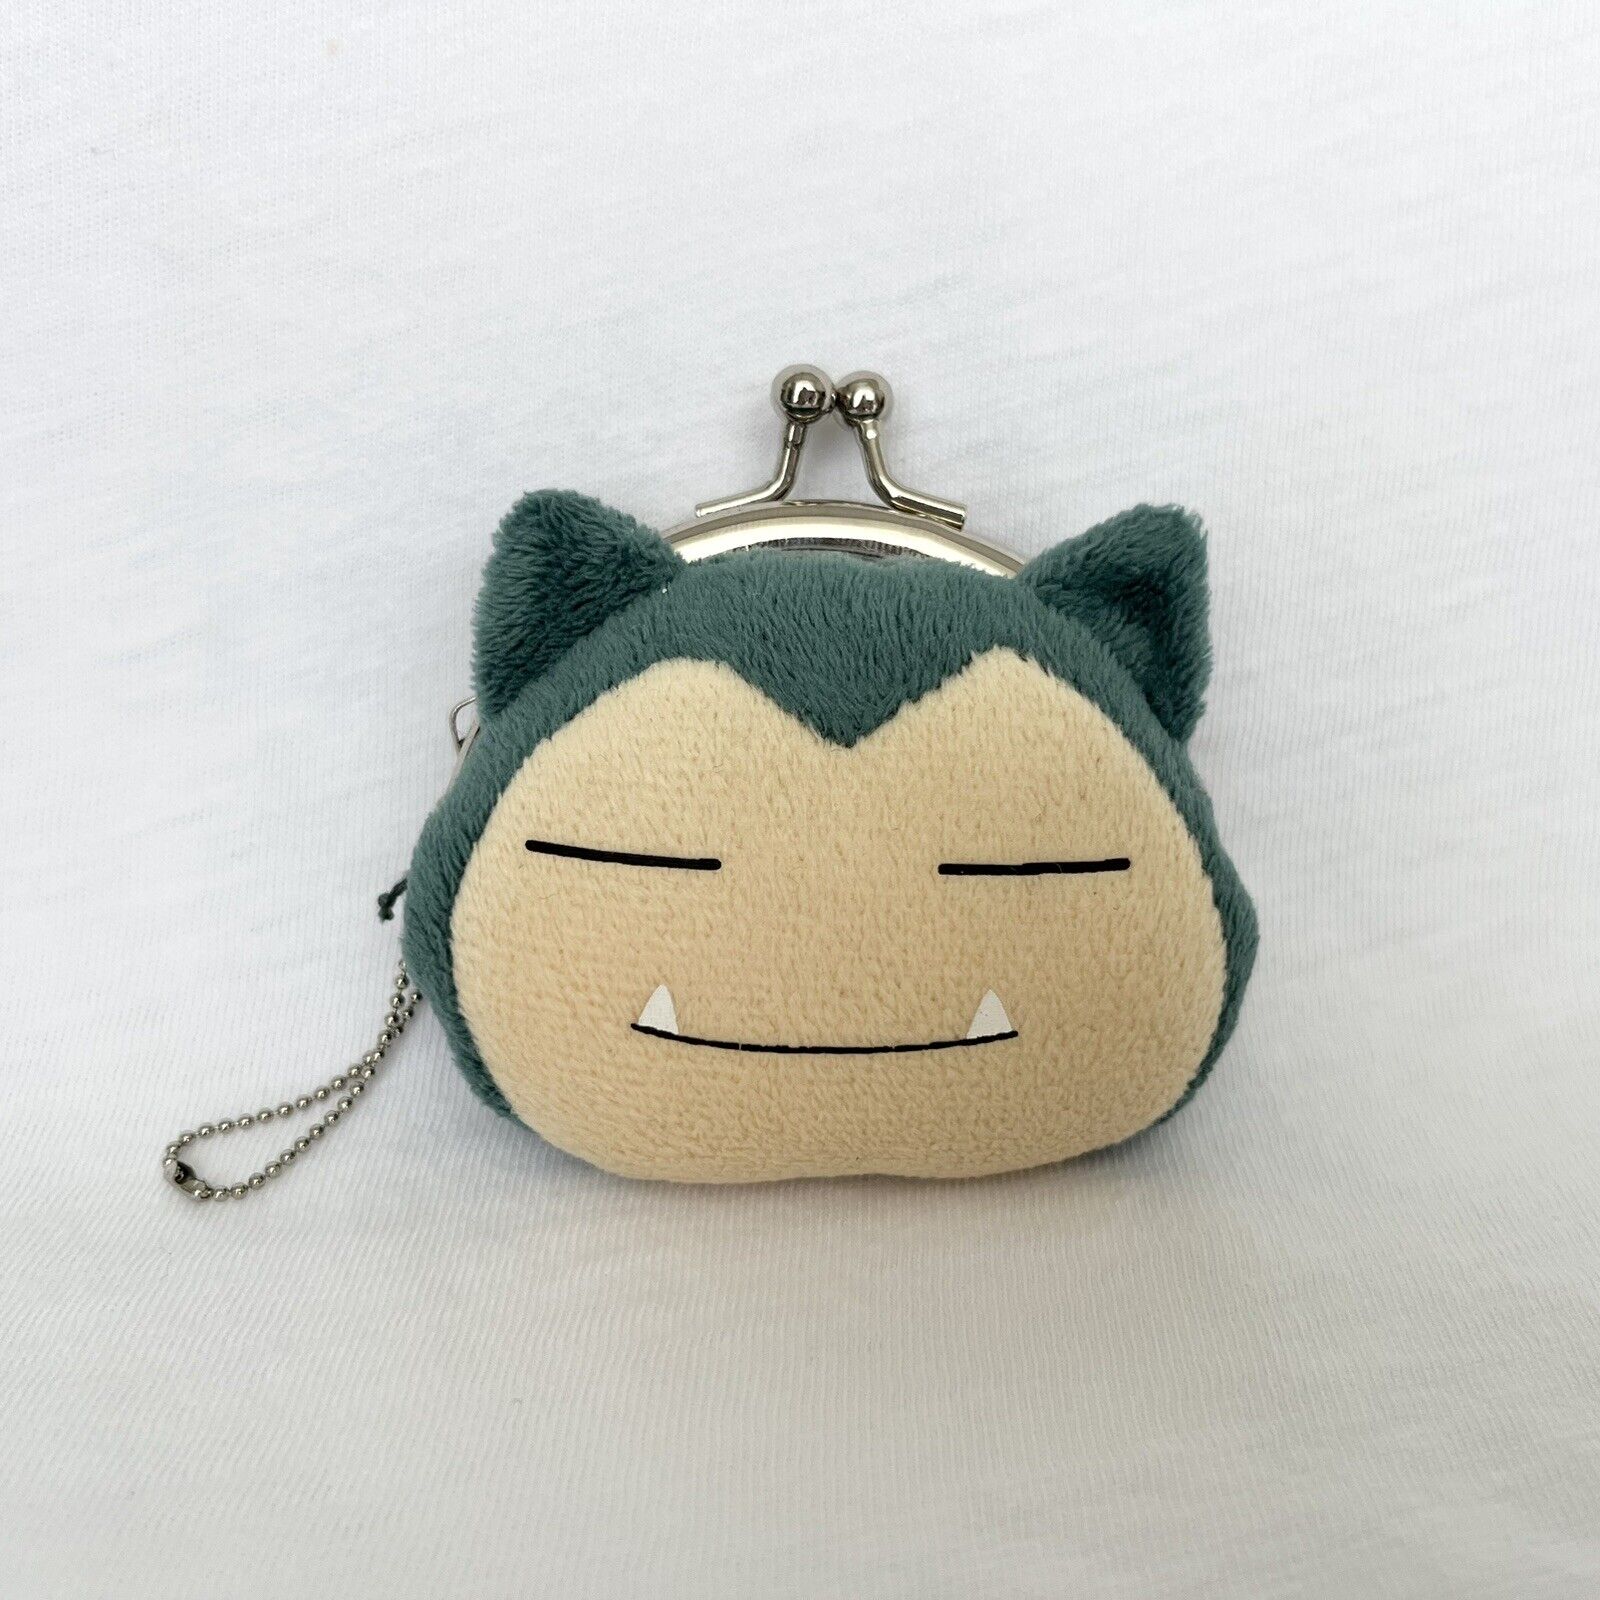 Snorlax plush mini coin purse with metal clasp, from Japan